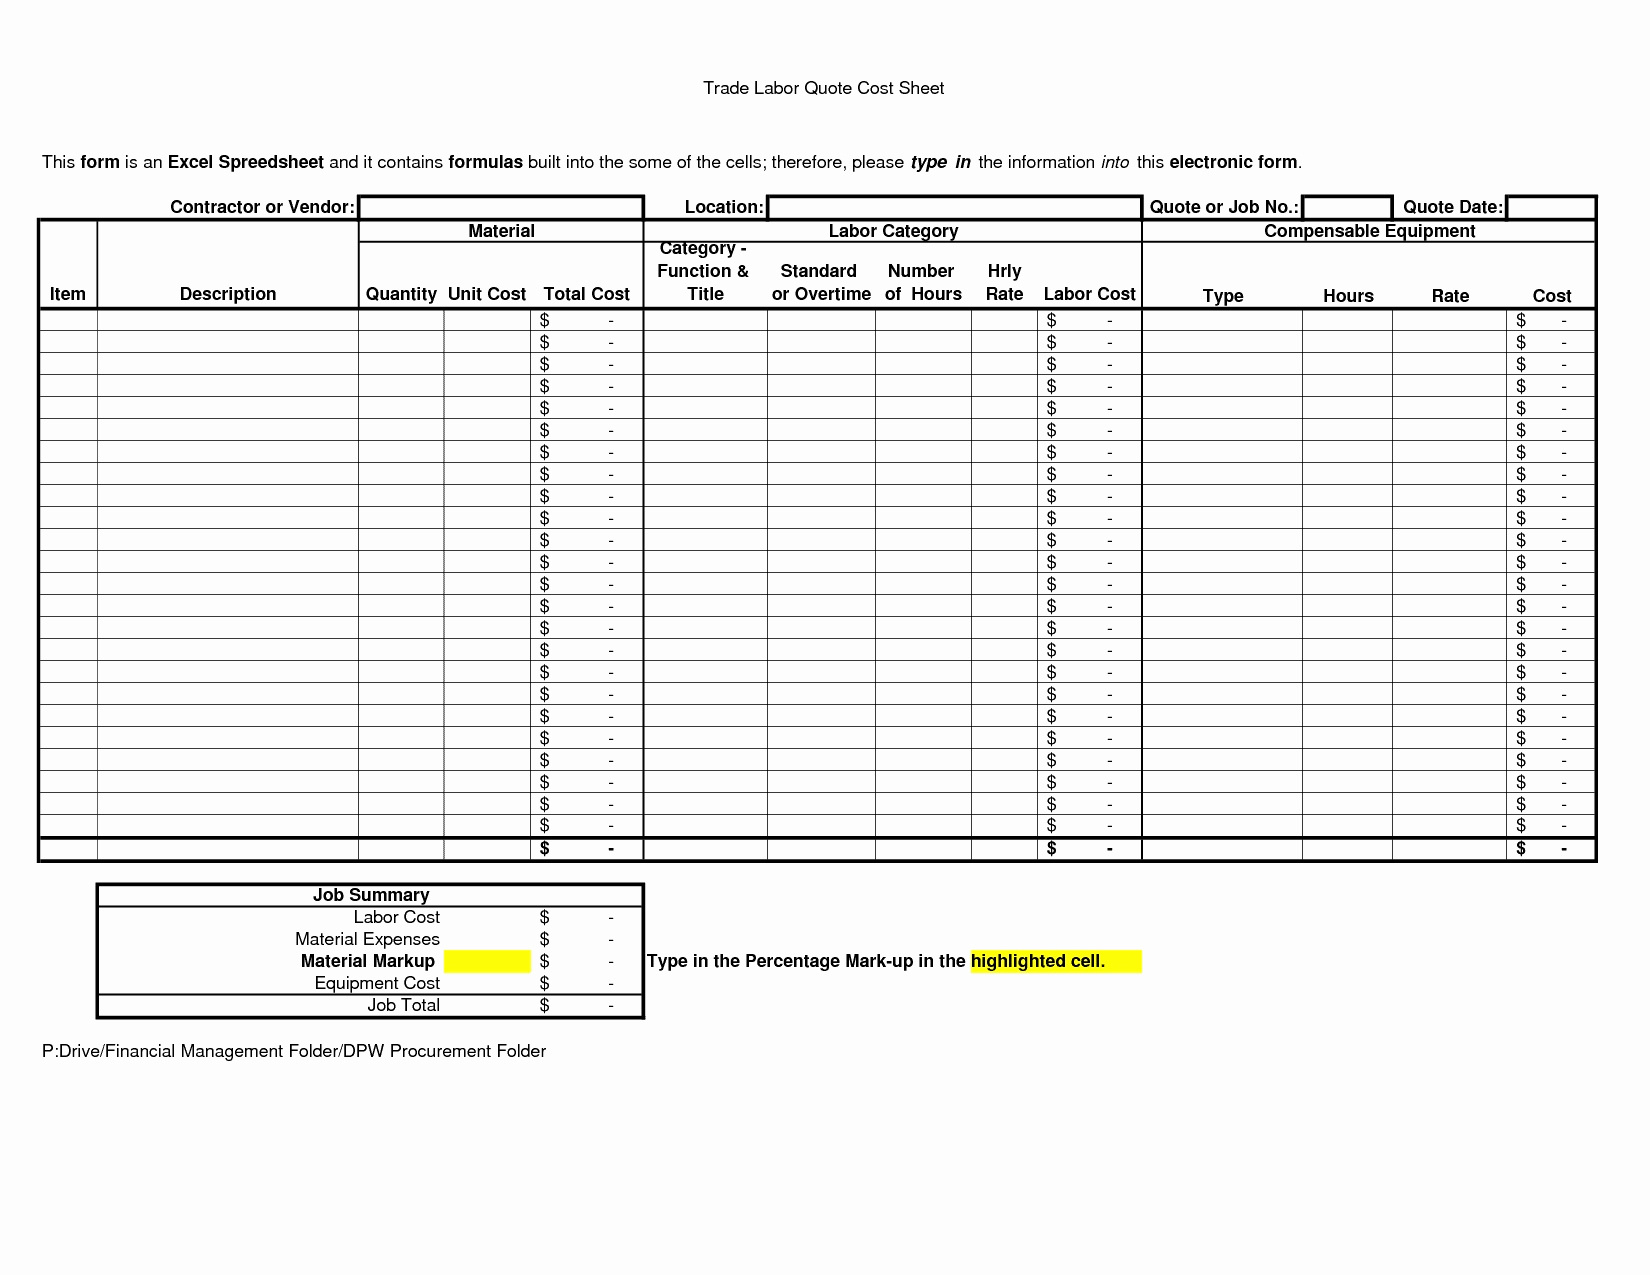 Home Building Cost Breakdown Spreadsheet With Construction Job Costing intended for Fresh Construction Cost Sheet Template